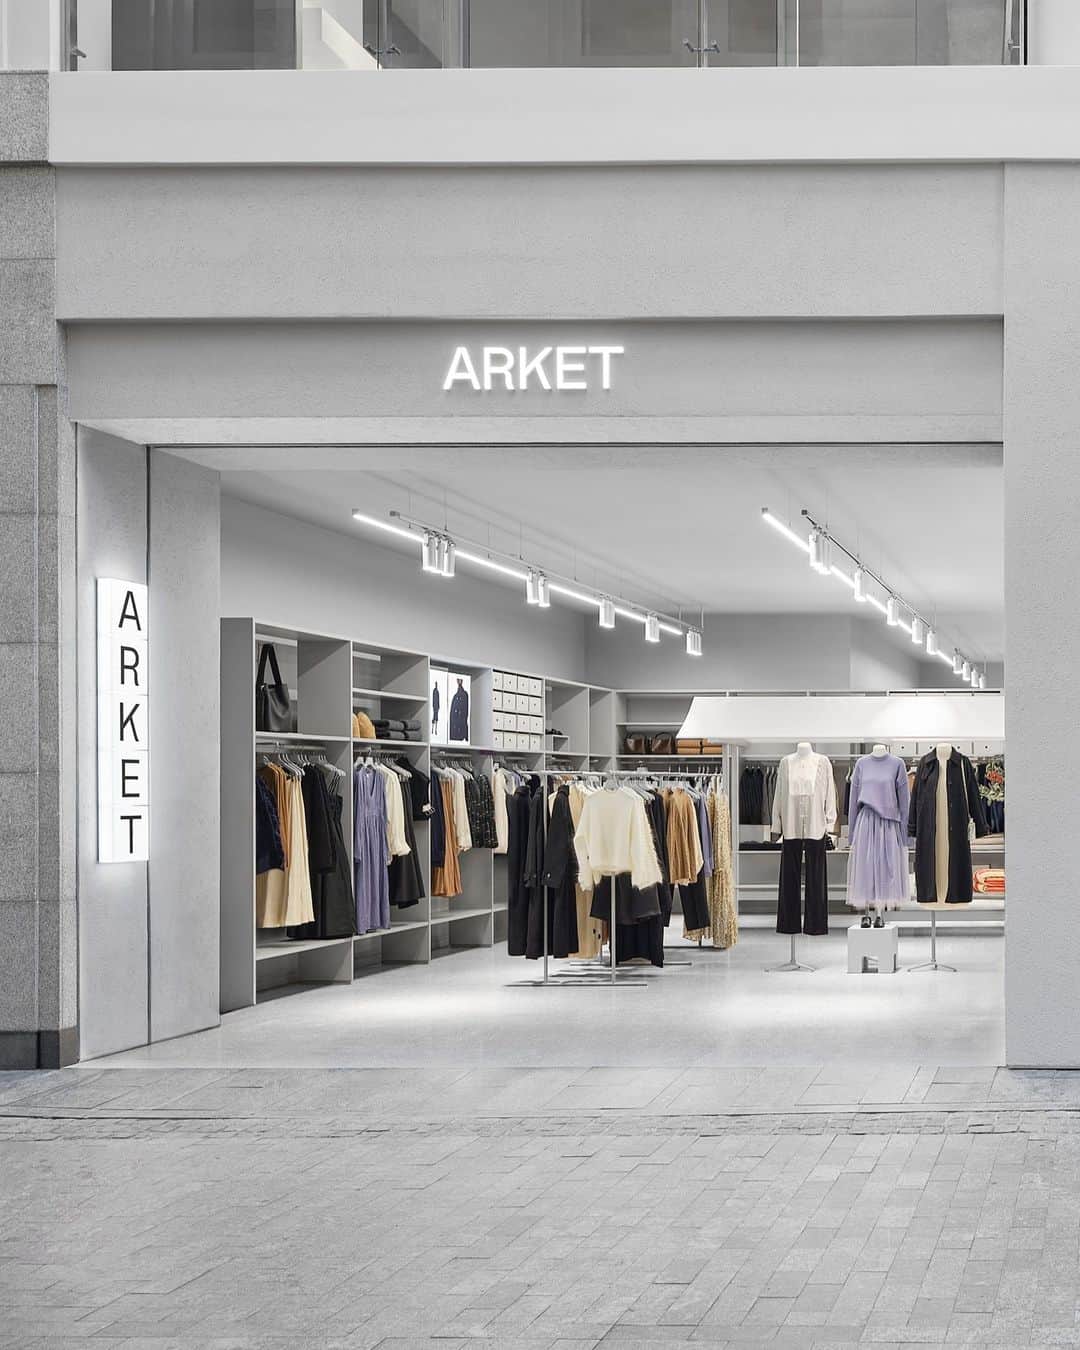 ARKETのインスタグラム：「The new ARKET flagship store, the first physical location in Latvia, will open this Friday, 8 December at noon. The first 50 customers will receive a special gift and we will be offering a sampling of seasonal treats from the ARKET café. Enjoy our opening weekend treat, sign up for our newsletter and receive 20% off your purchase through the opening weekend. - #ARKET #Riga」